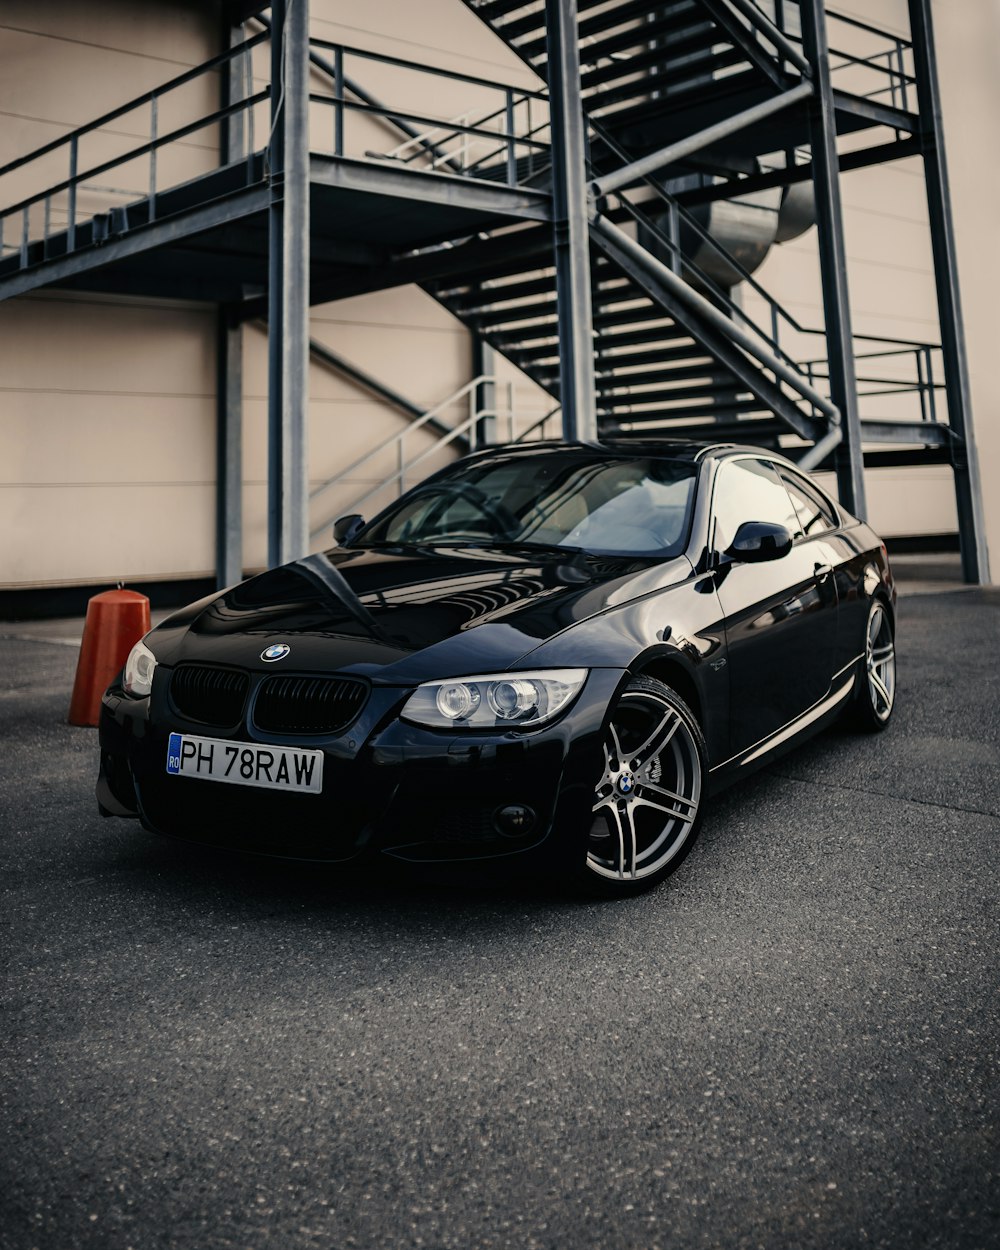 black bmw m 3 coupe parked in garage